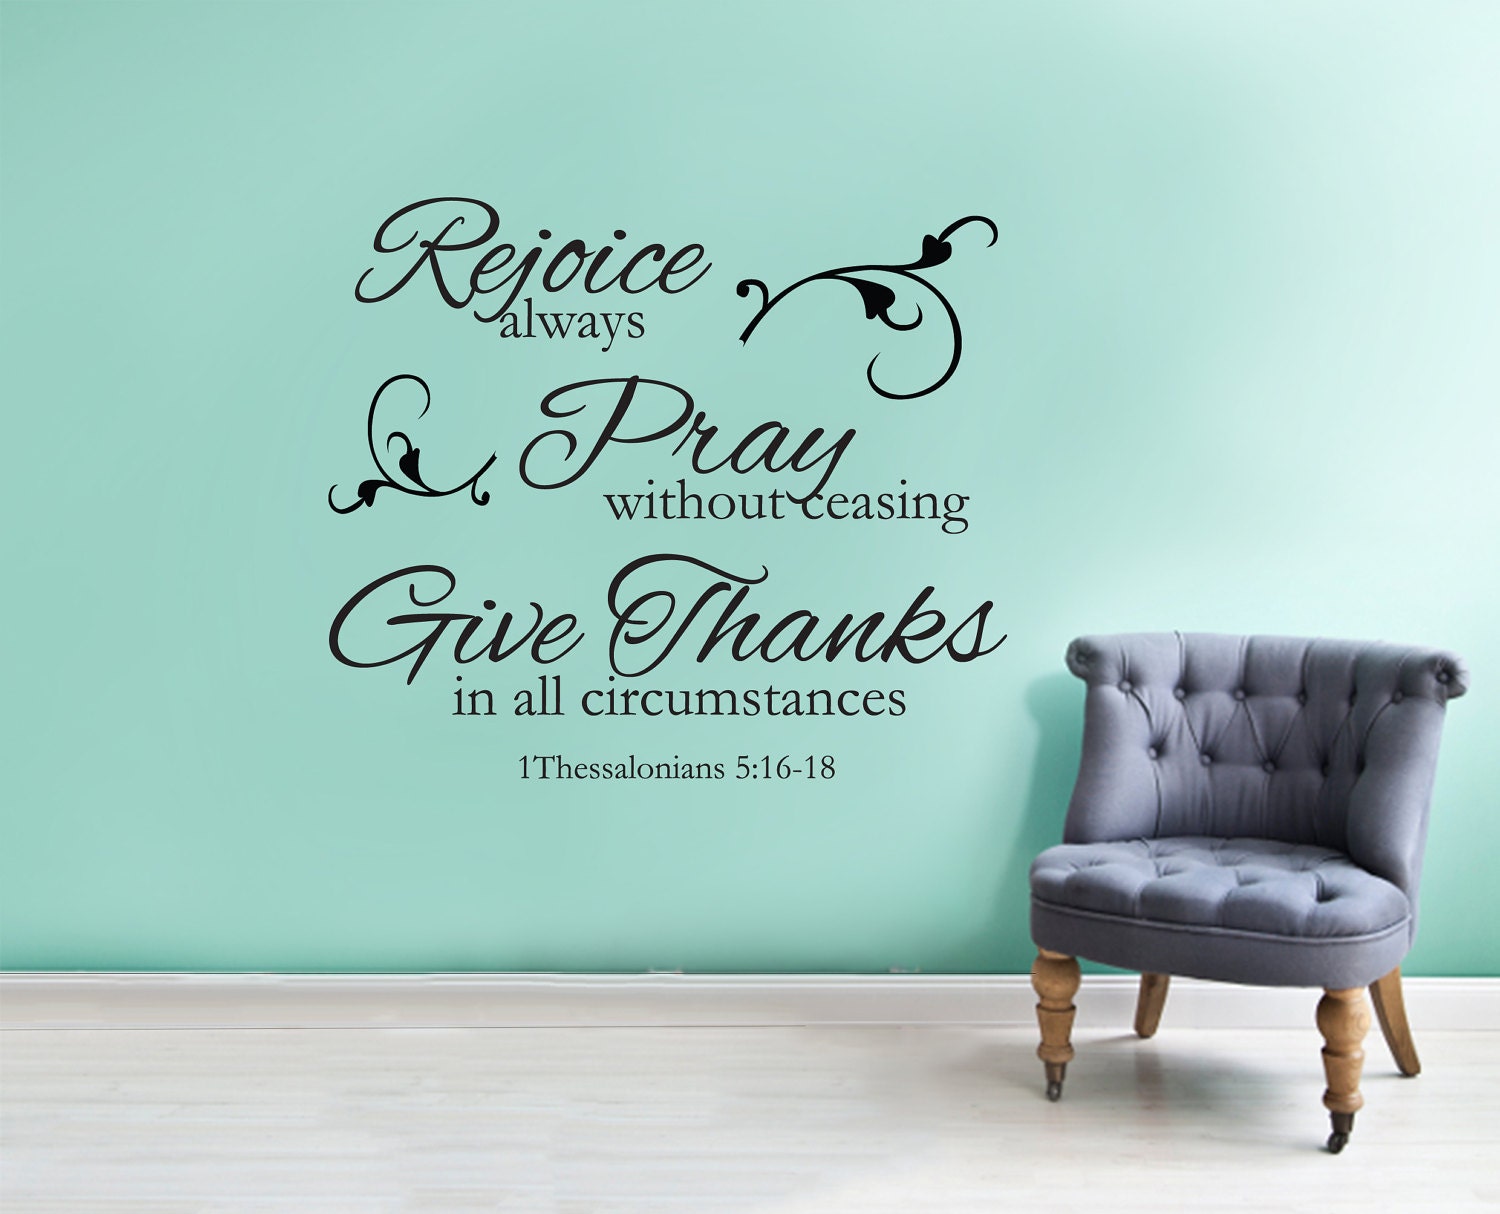 Vinyl Wall Decal 1 Thessalonians 5:16-18 "Rejoice always, Pray without...